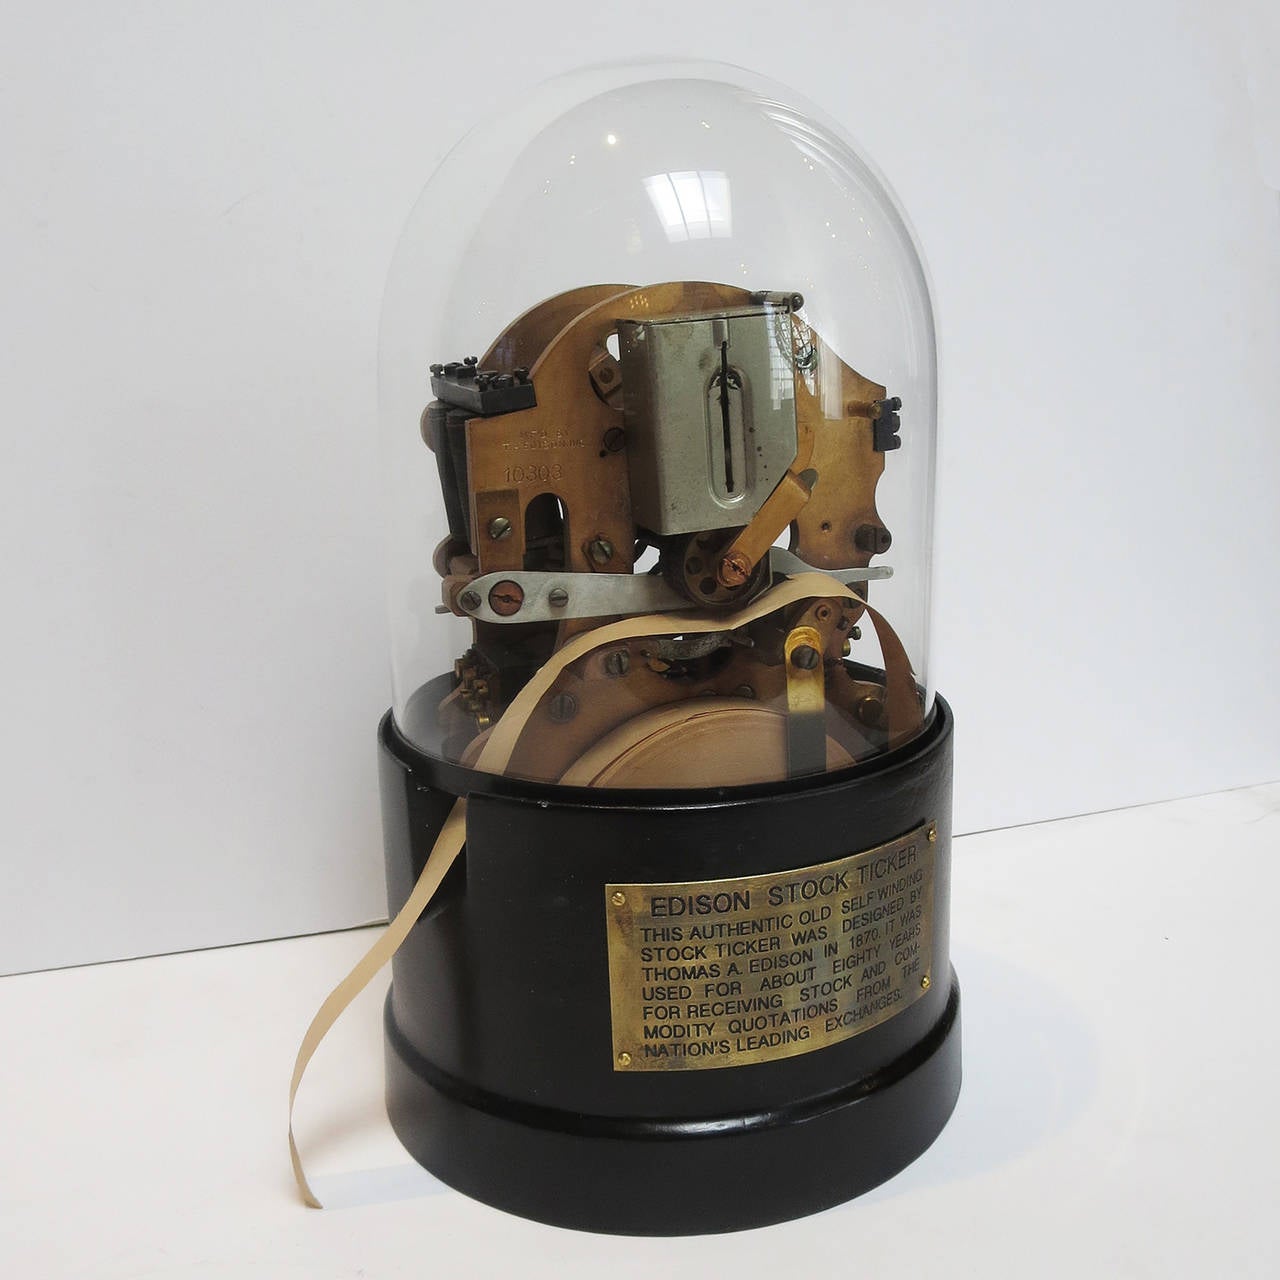 Invented in the 1870s, the ticker tape machine was the first invention by Thomas Edison, and helped him finance his many later creations. An electrical impulse fed into the unit, and the 